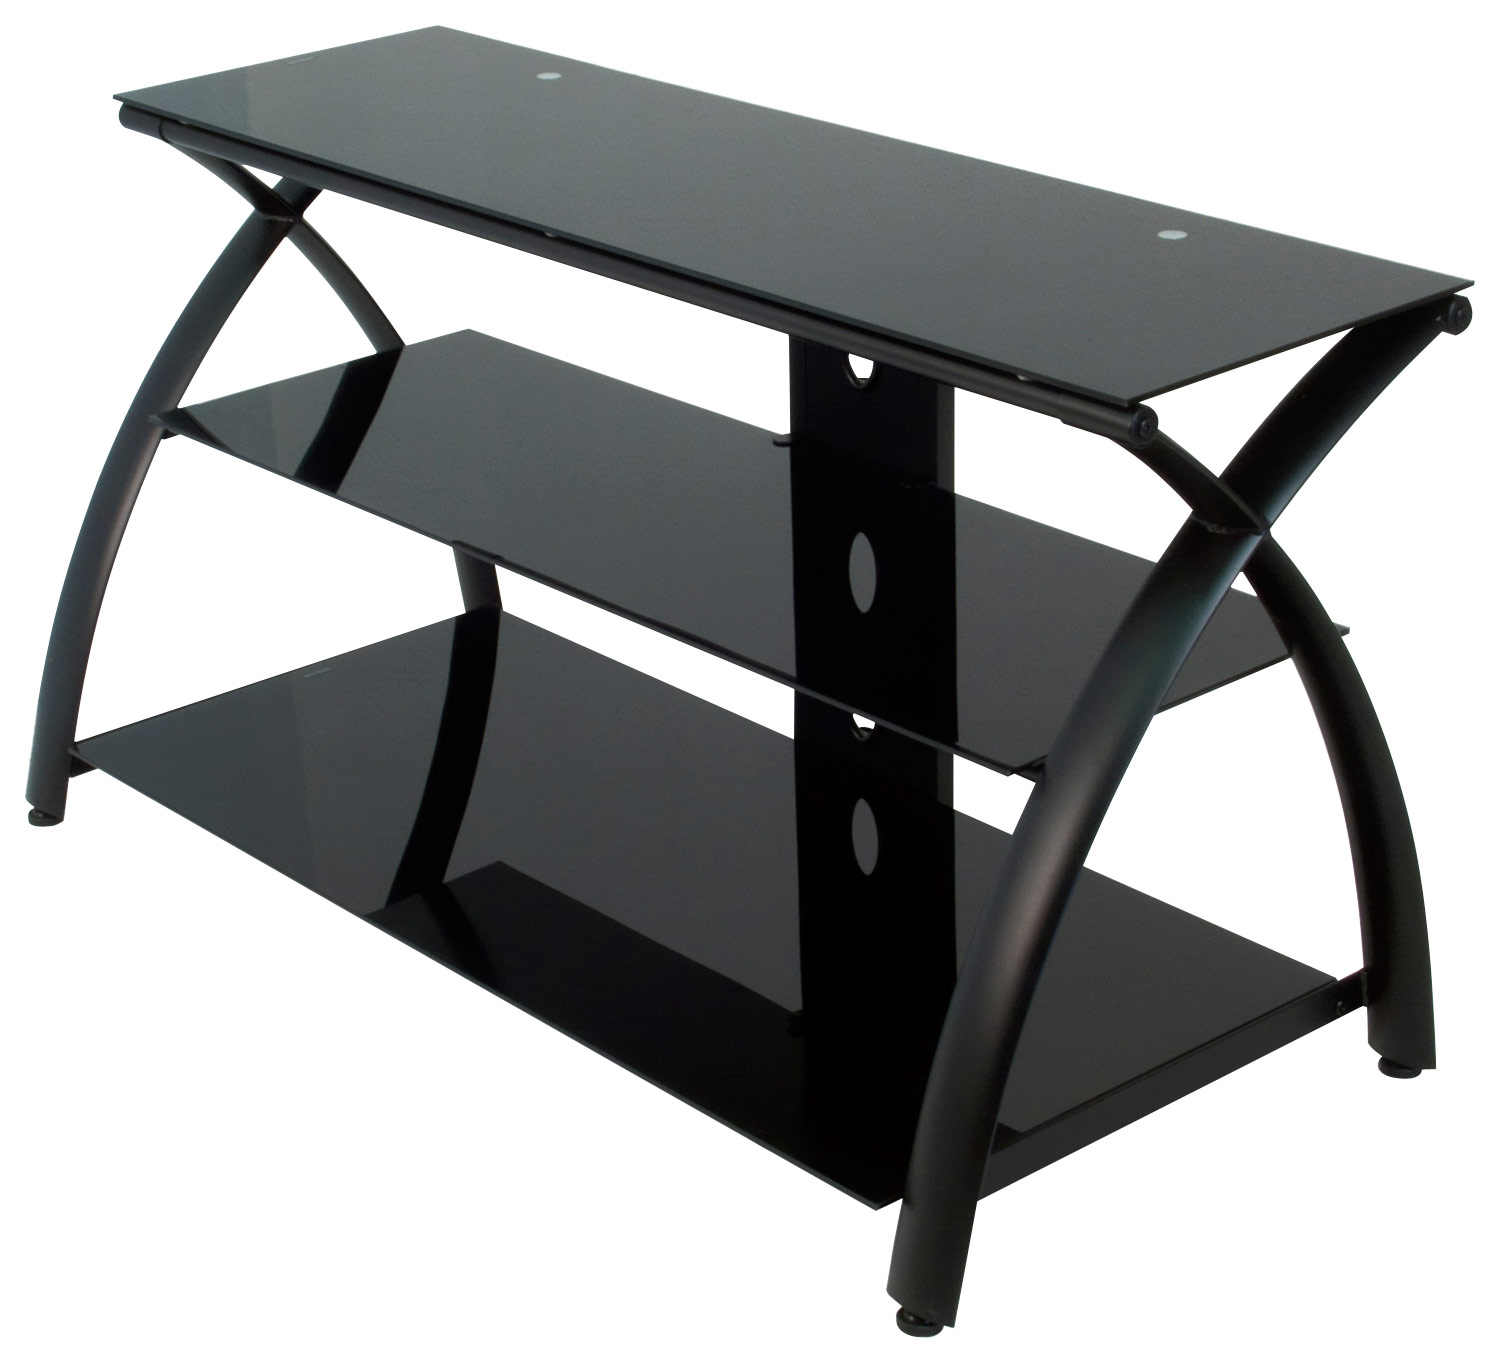 Calico Designs - Futura 3-Tier Glass TV Stand for Most Flat-Panel TVs Up to 46" - Black